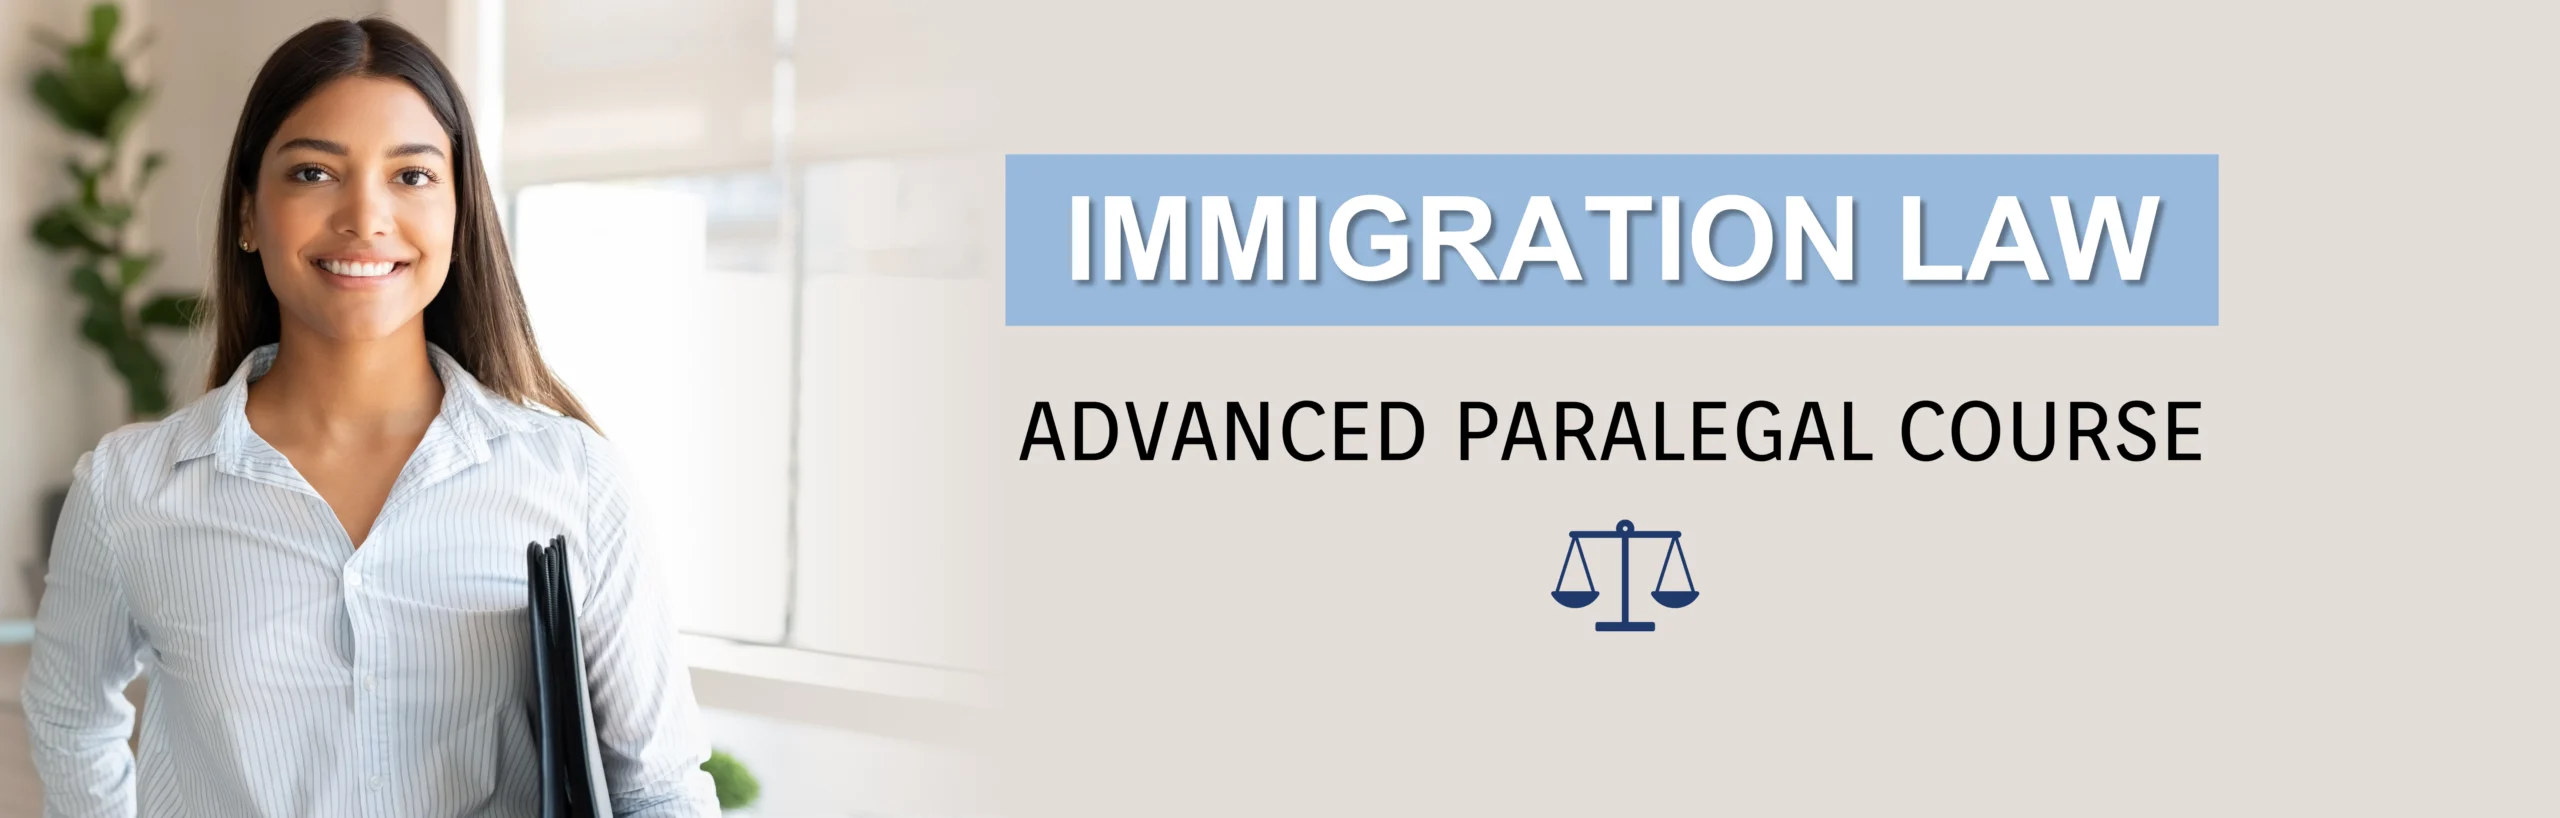 Advanced Paralegal Immigration Law Slider